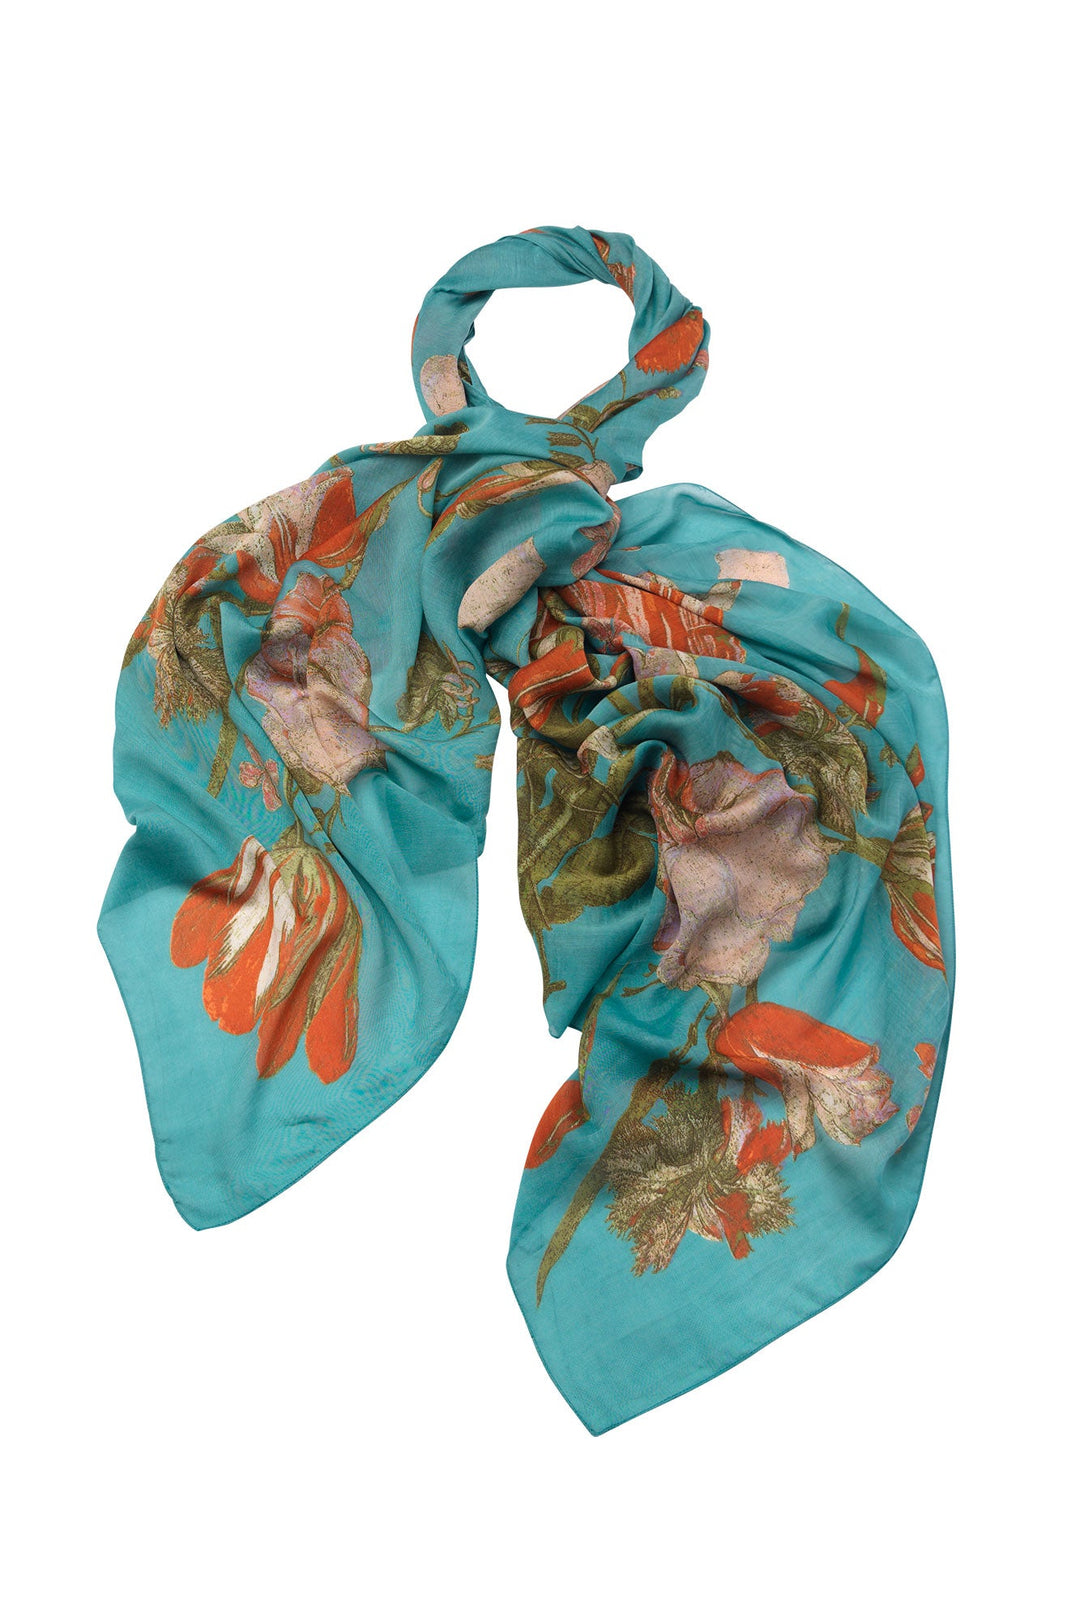 Women's accessories, gifts for her. Large scarf in blue with tulip floral print by One Hundred Stars